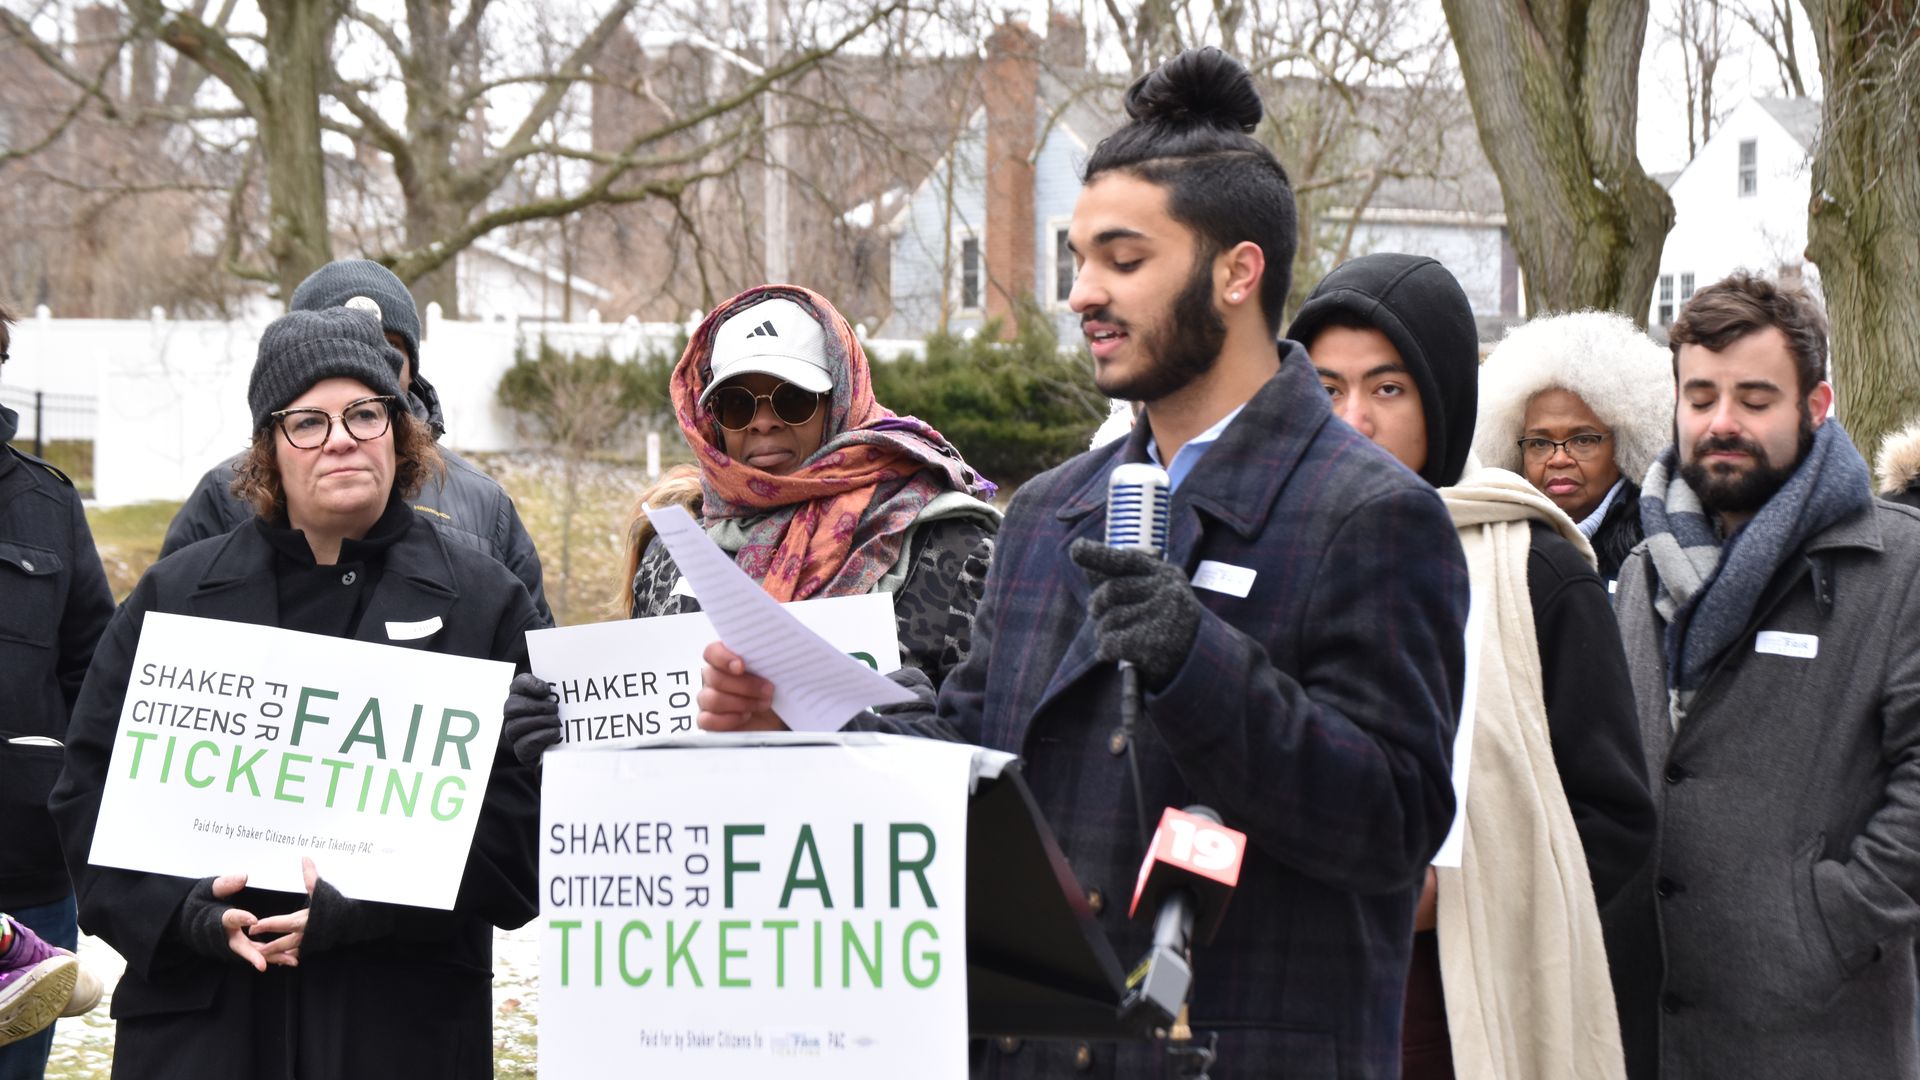 A young man speaks outdoors with a microphone, as people hold signs saying "Shaker Citizens for Fair Ticketing"